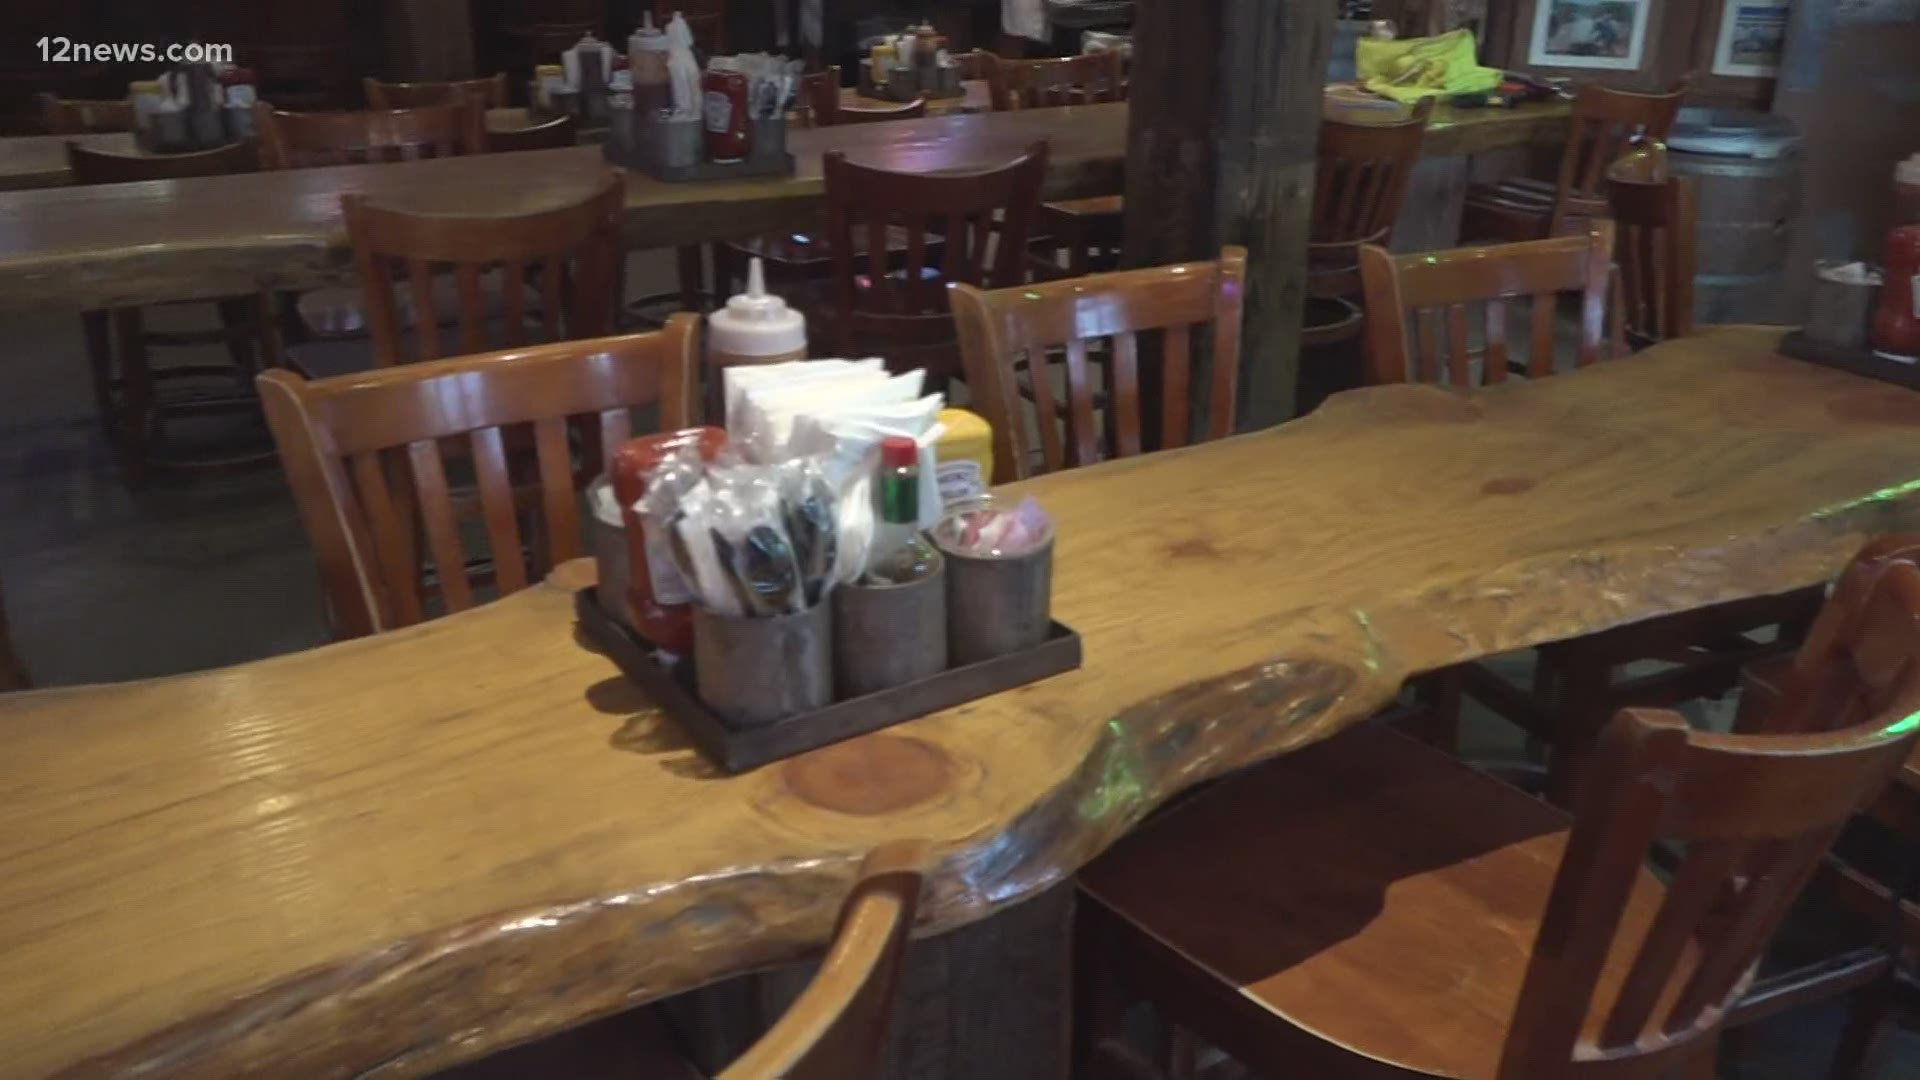 The Buffalo Chip Saloon in Cave Creek is ready for dine-in service on May 11, but other local restaurants are putting reopening on hold.